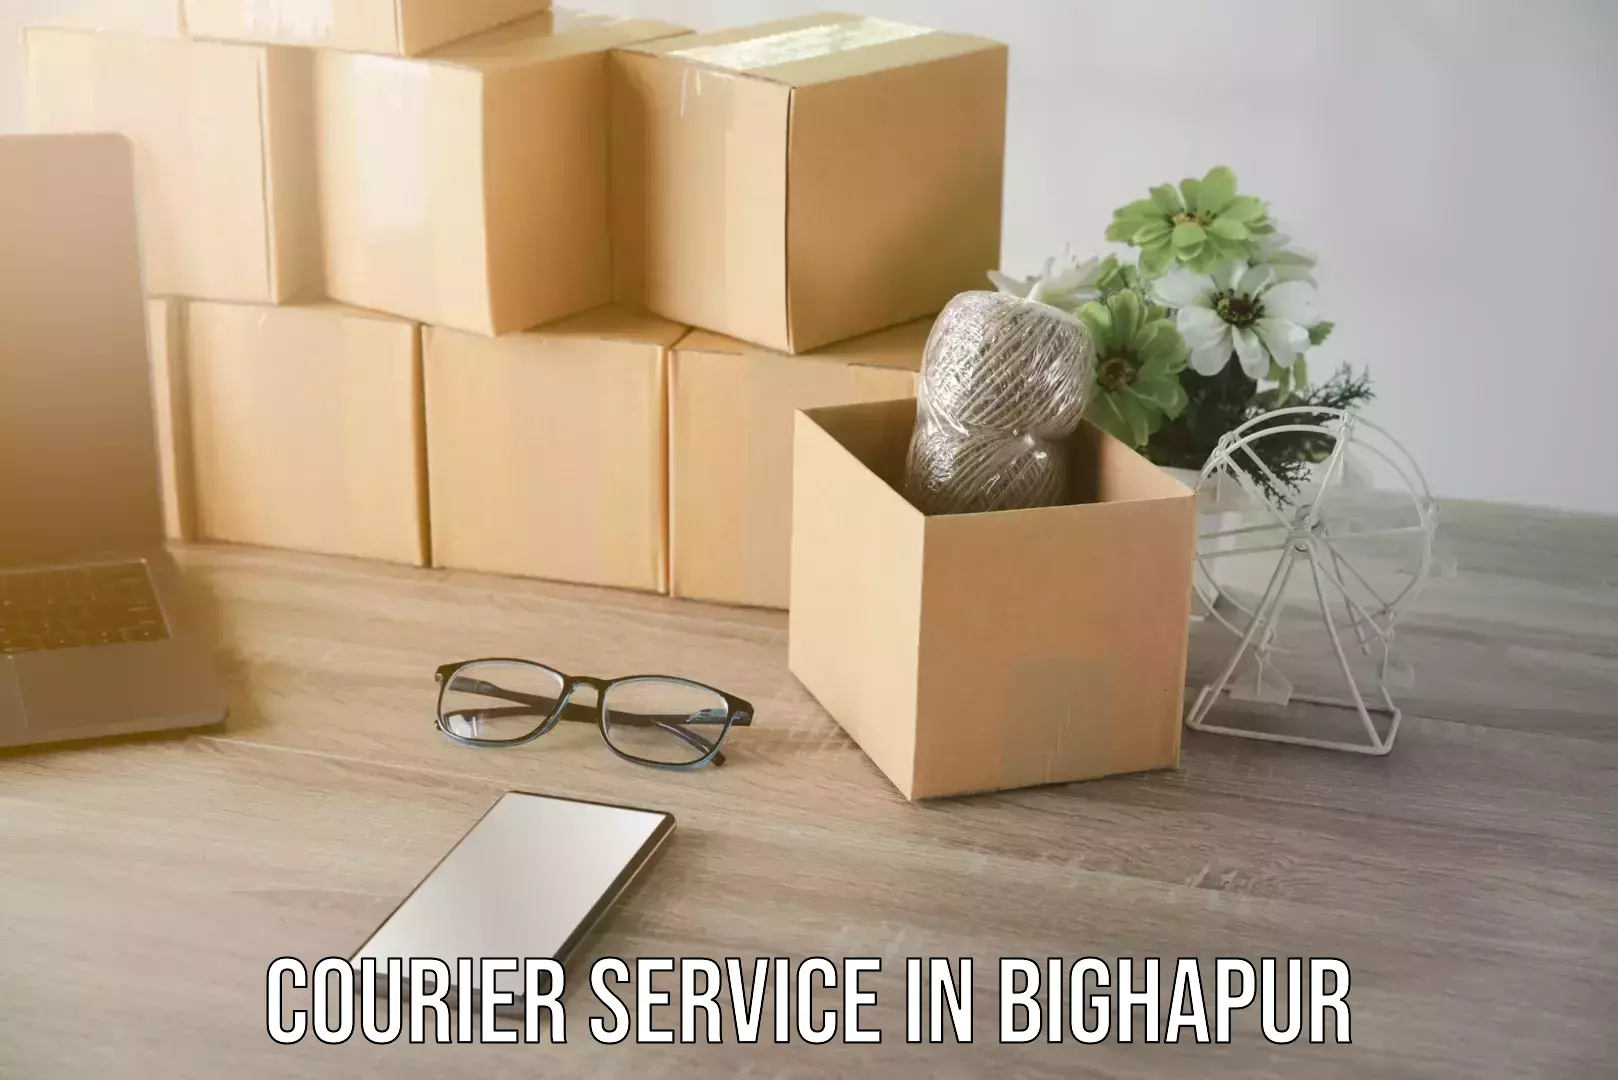 Fast delivery service in Bighapur